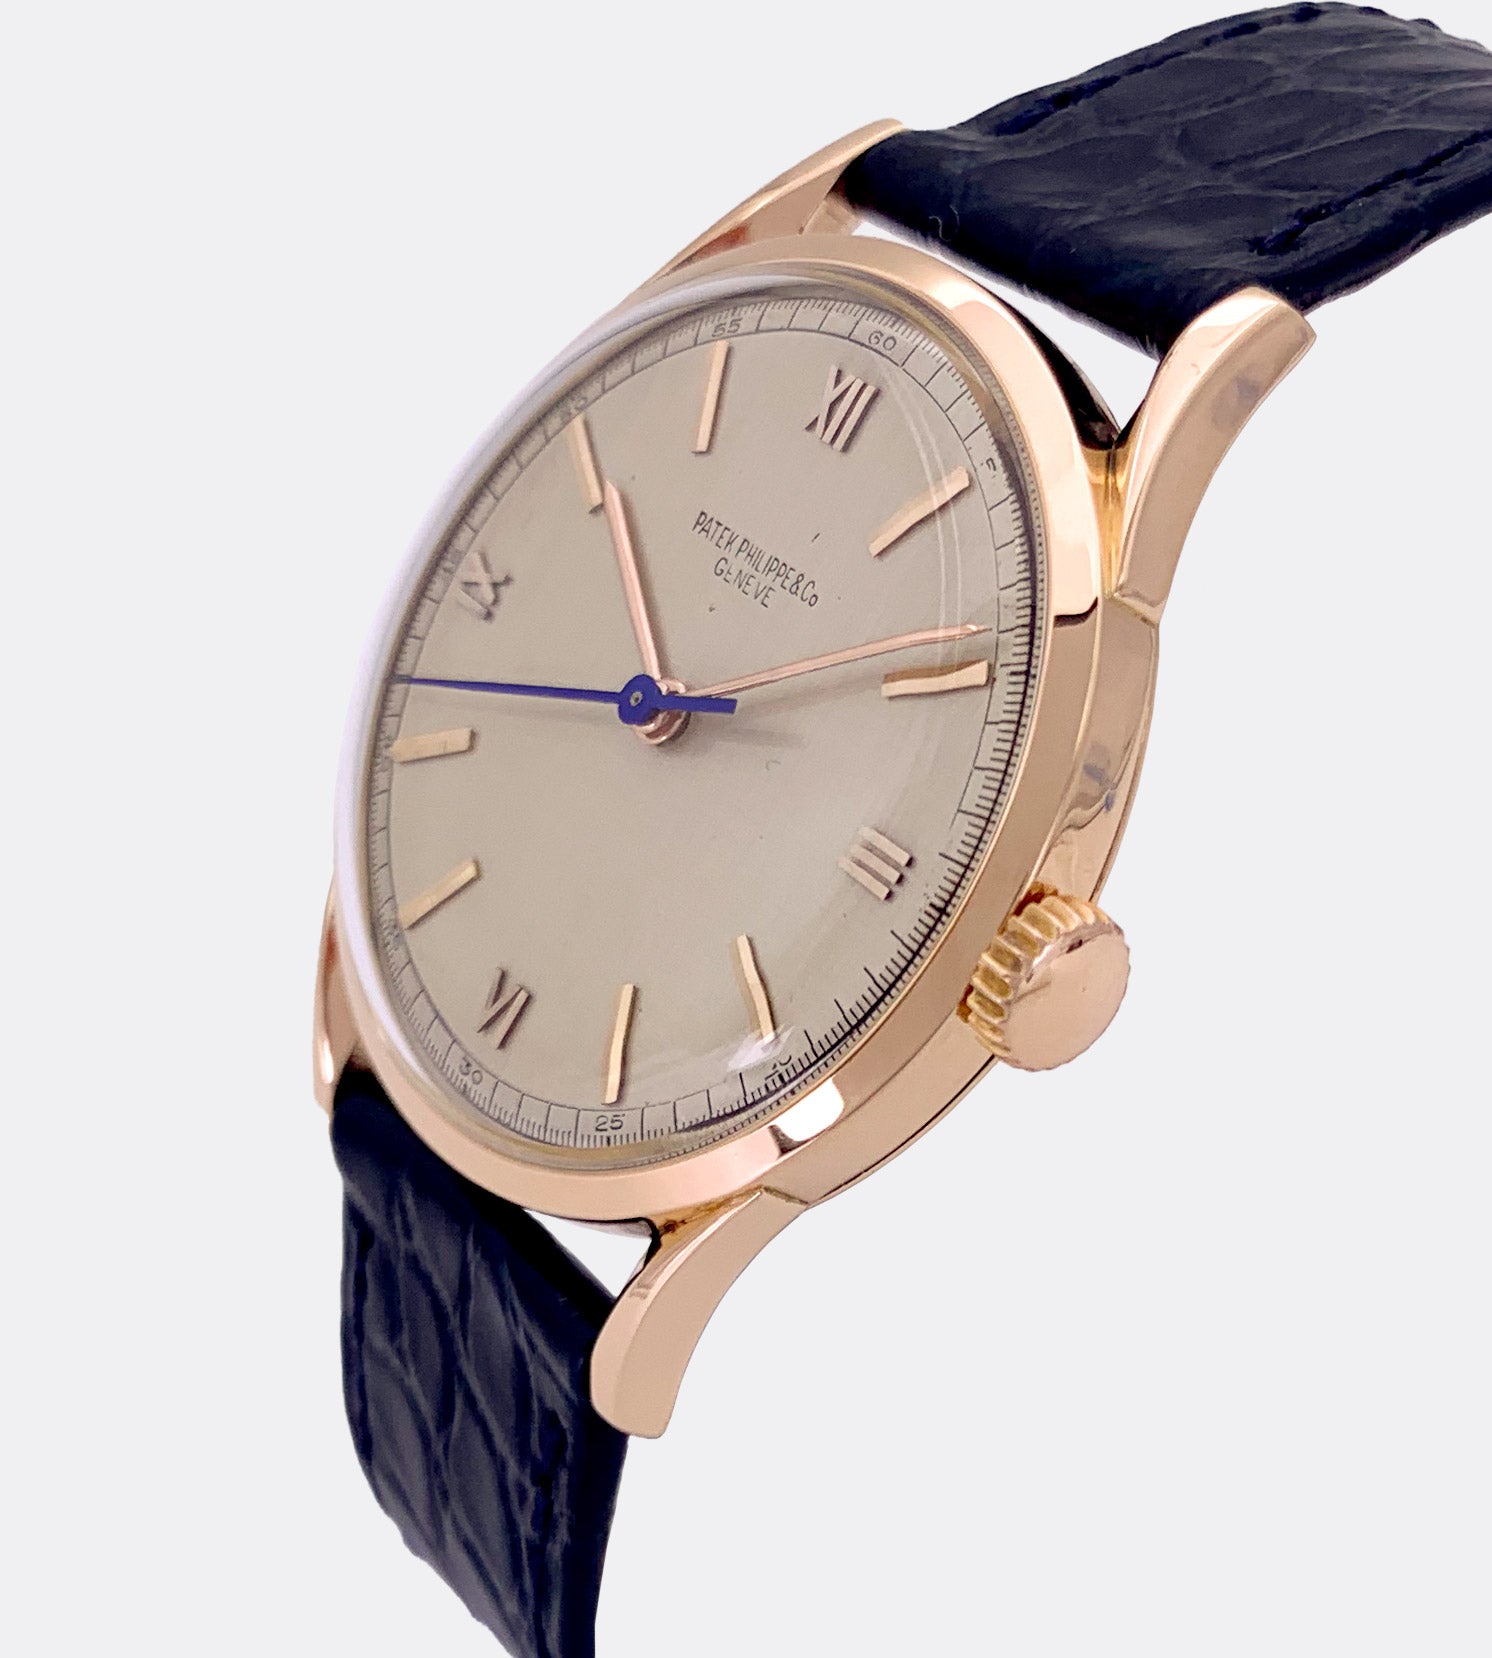 PATEK PHILIPPE | One-of-a-Kind | Jumbo Calatrava | 18K Red Gold | 1/5 Seconds Track | Blue Second | Ref. 1536 / 1526 | 1940s